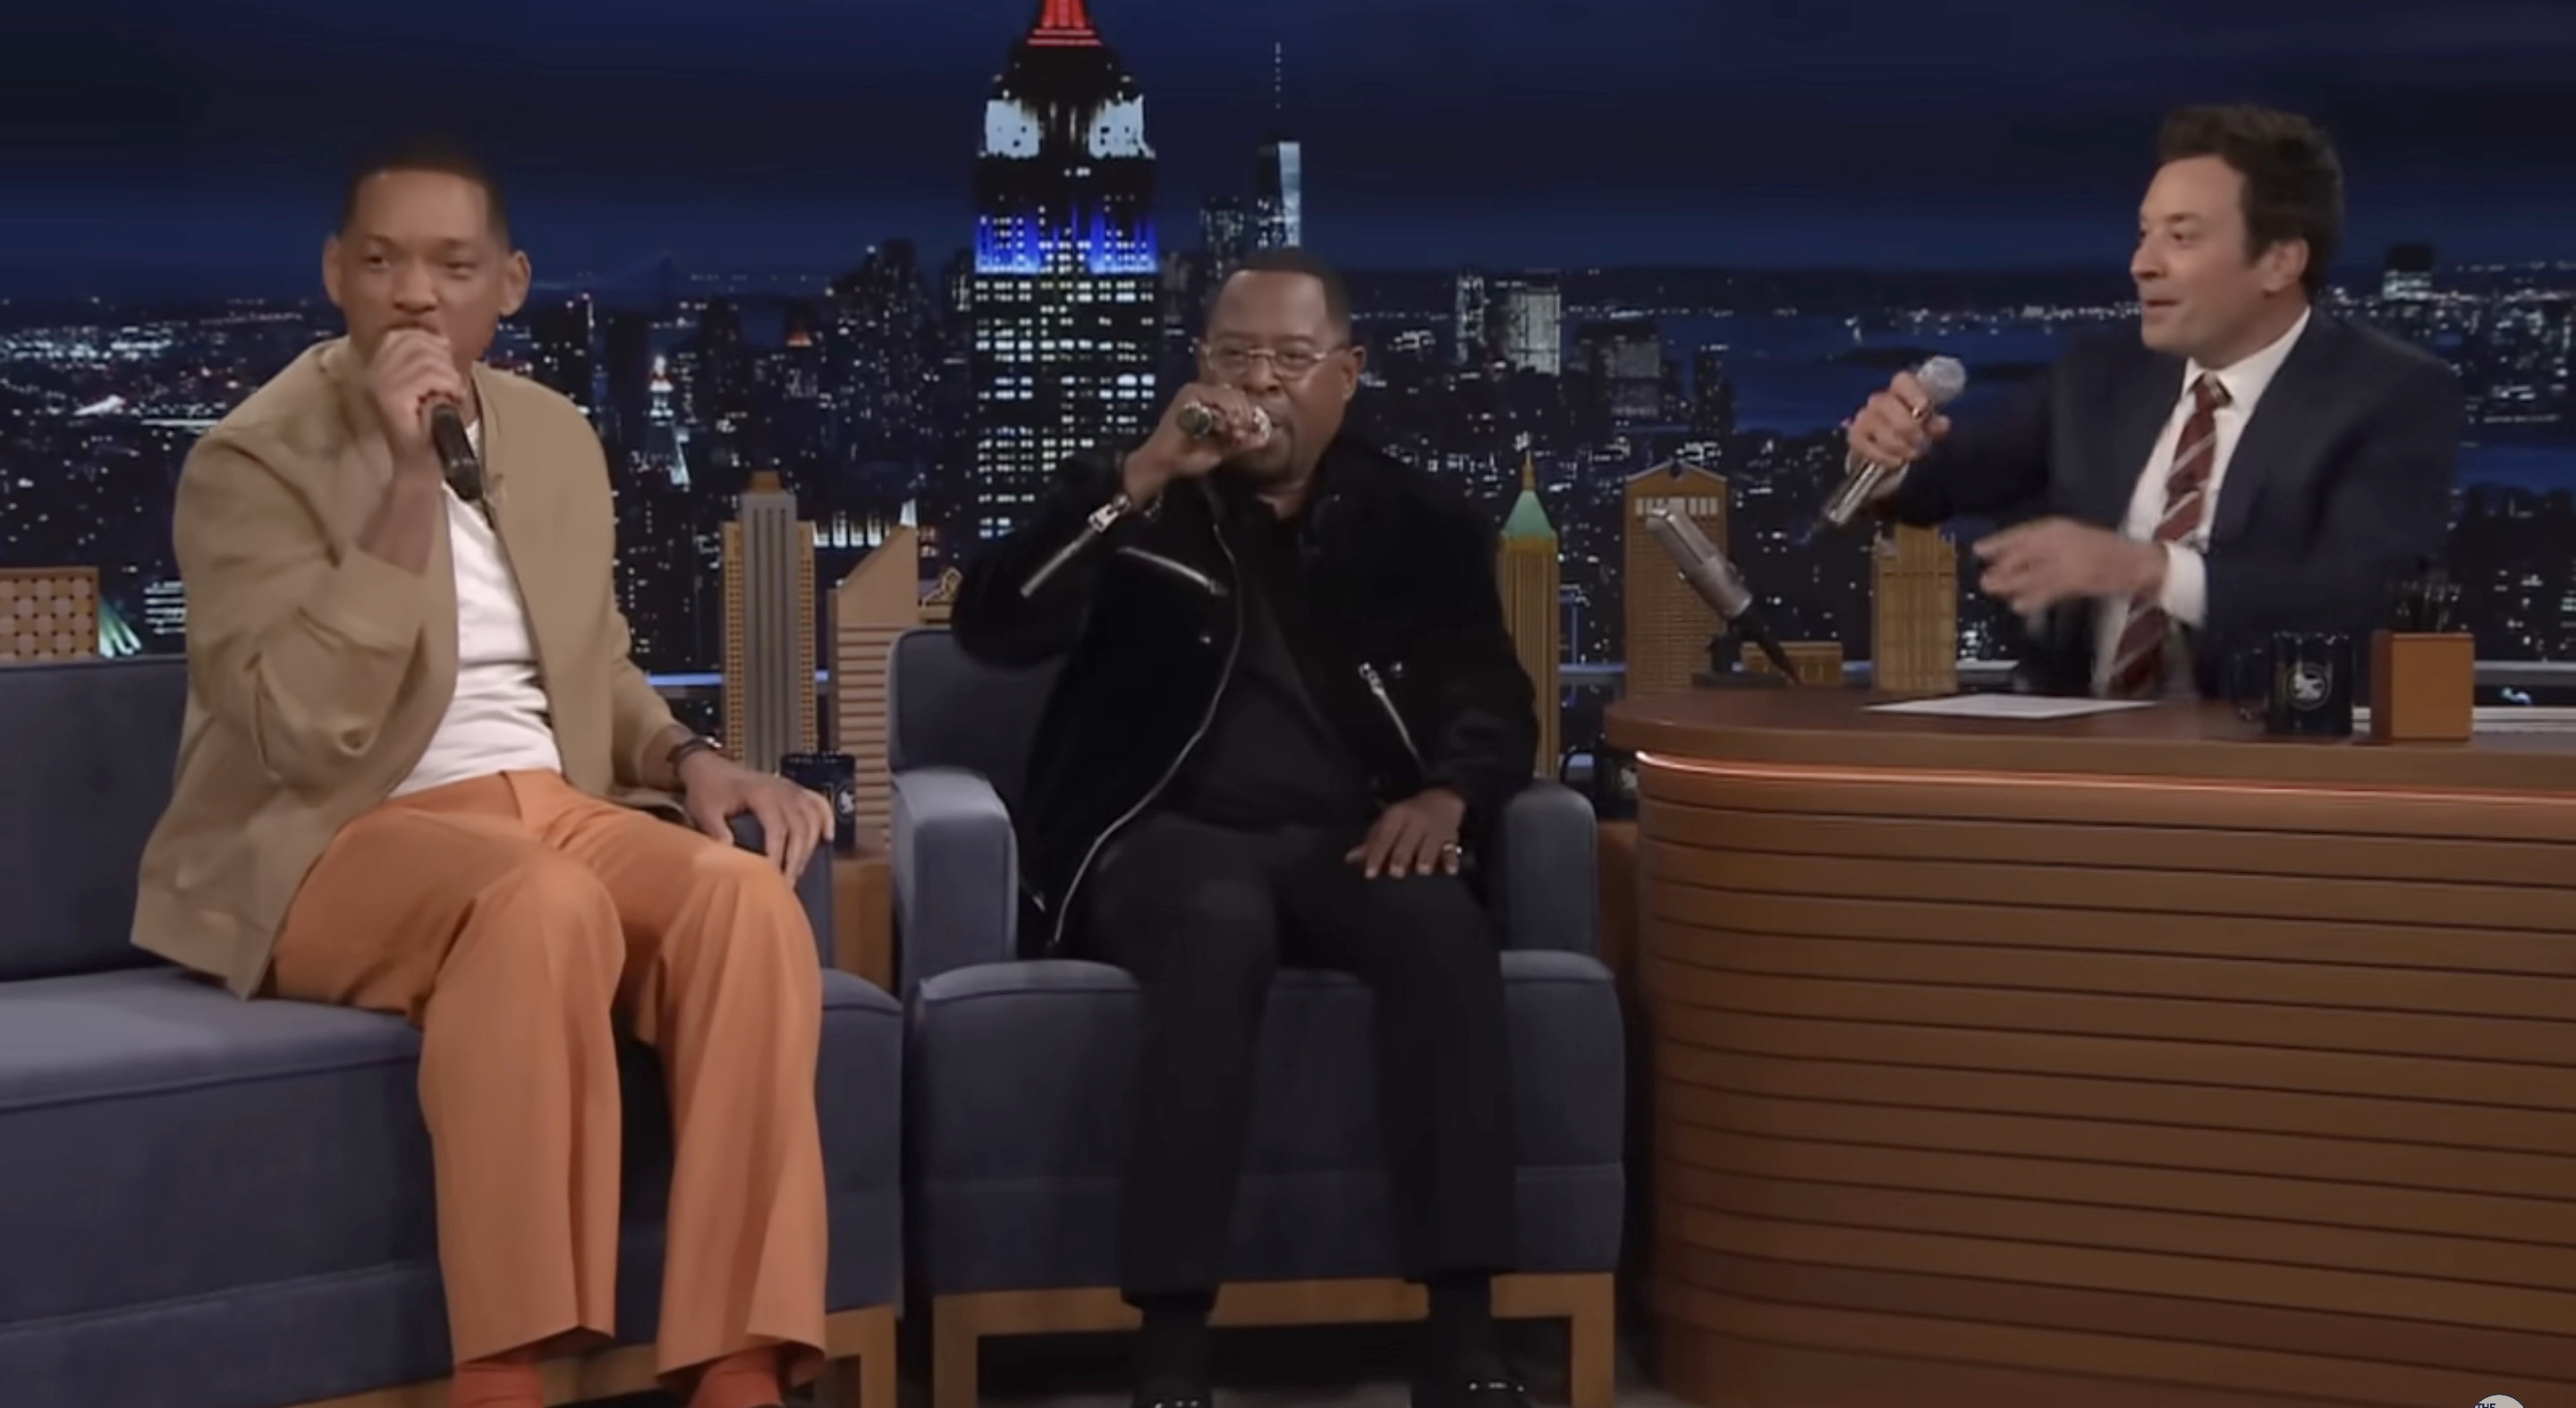 Fans claimed Martin looked 'frail' as he sang beside his Bad Boys co-star Will Smith